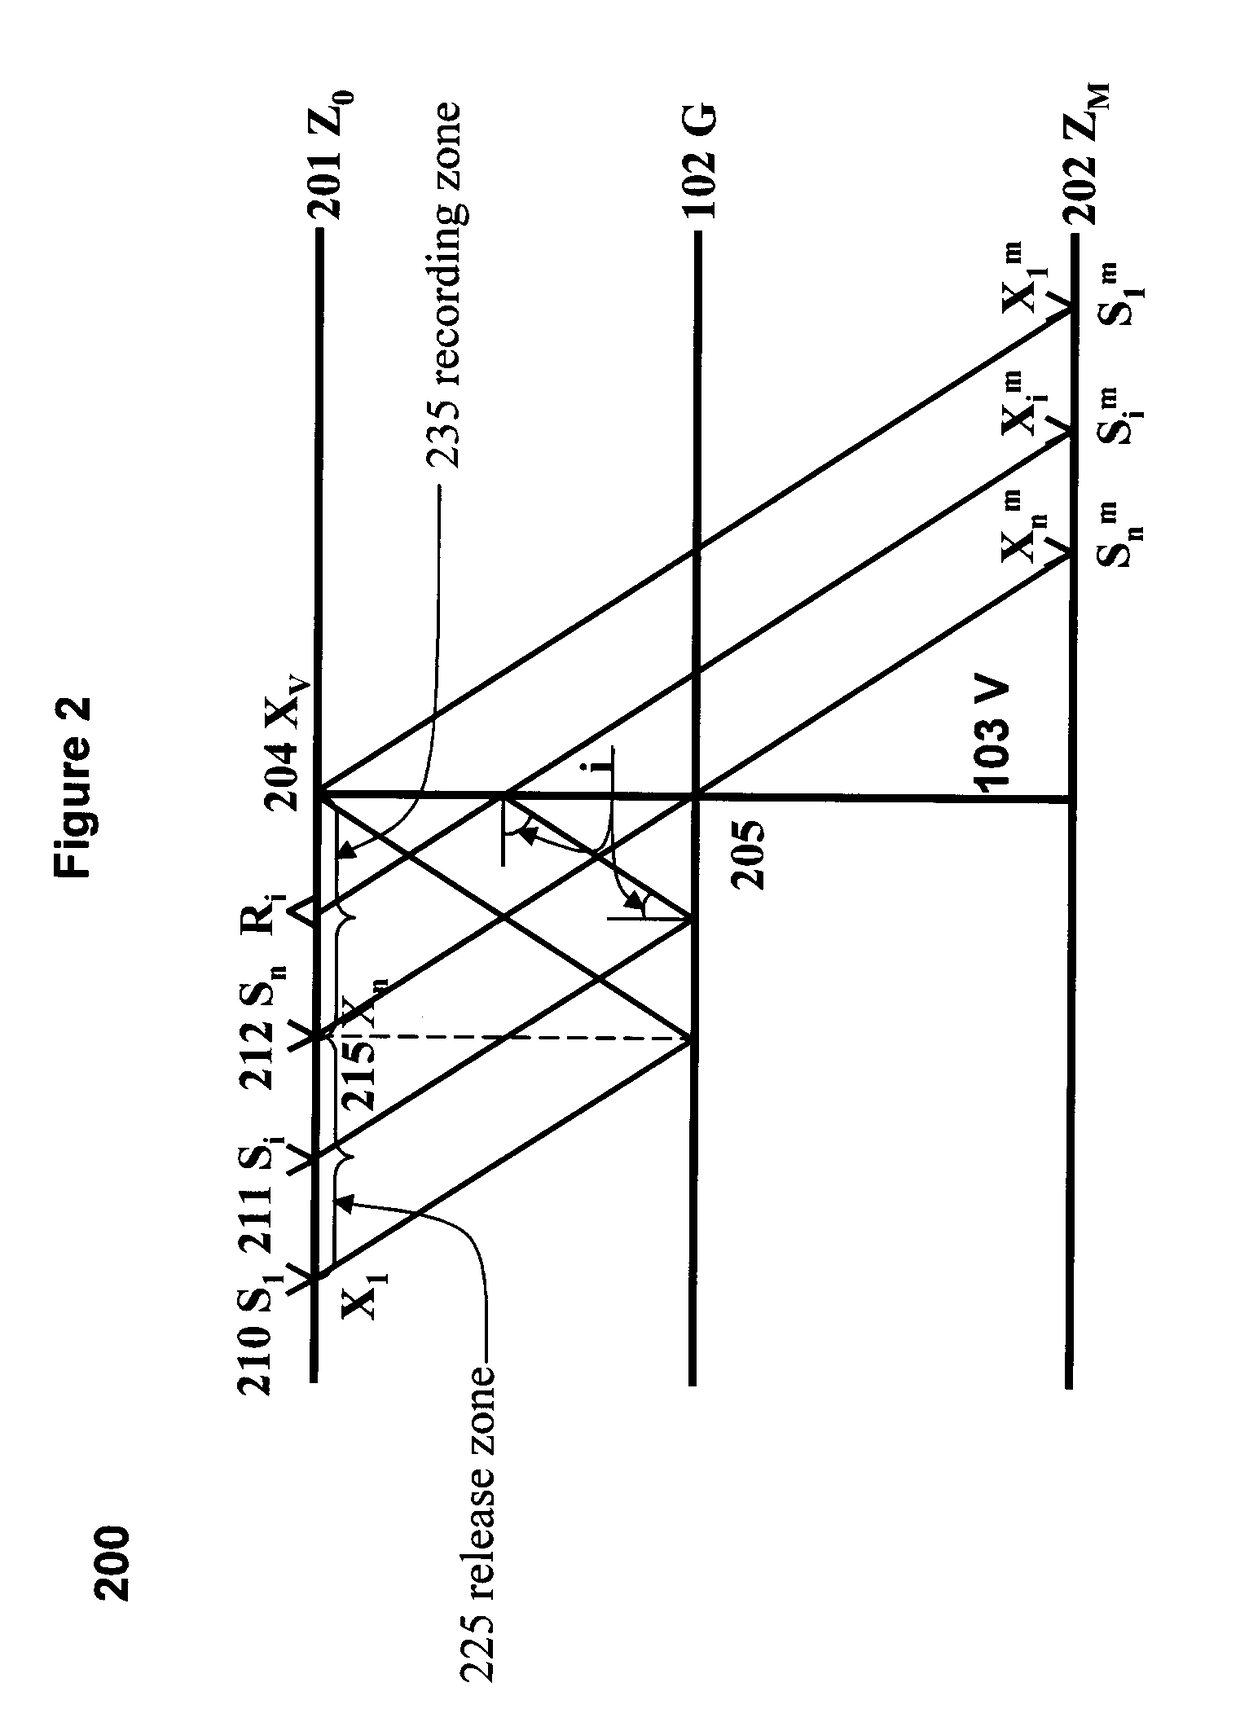 Method of surface seismic imaging using both reflected and transmitted waves